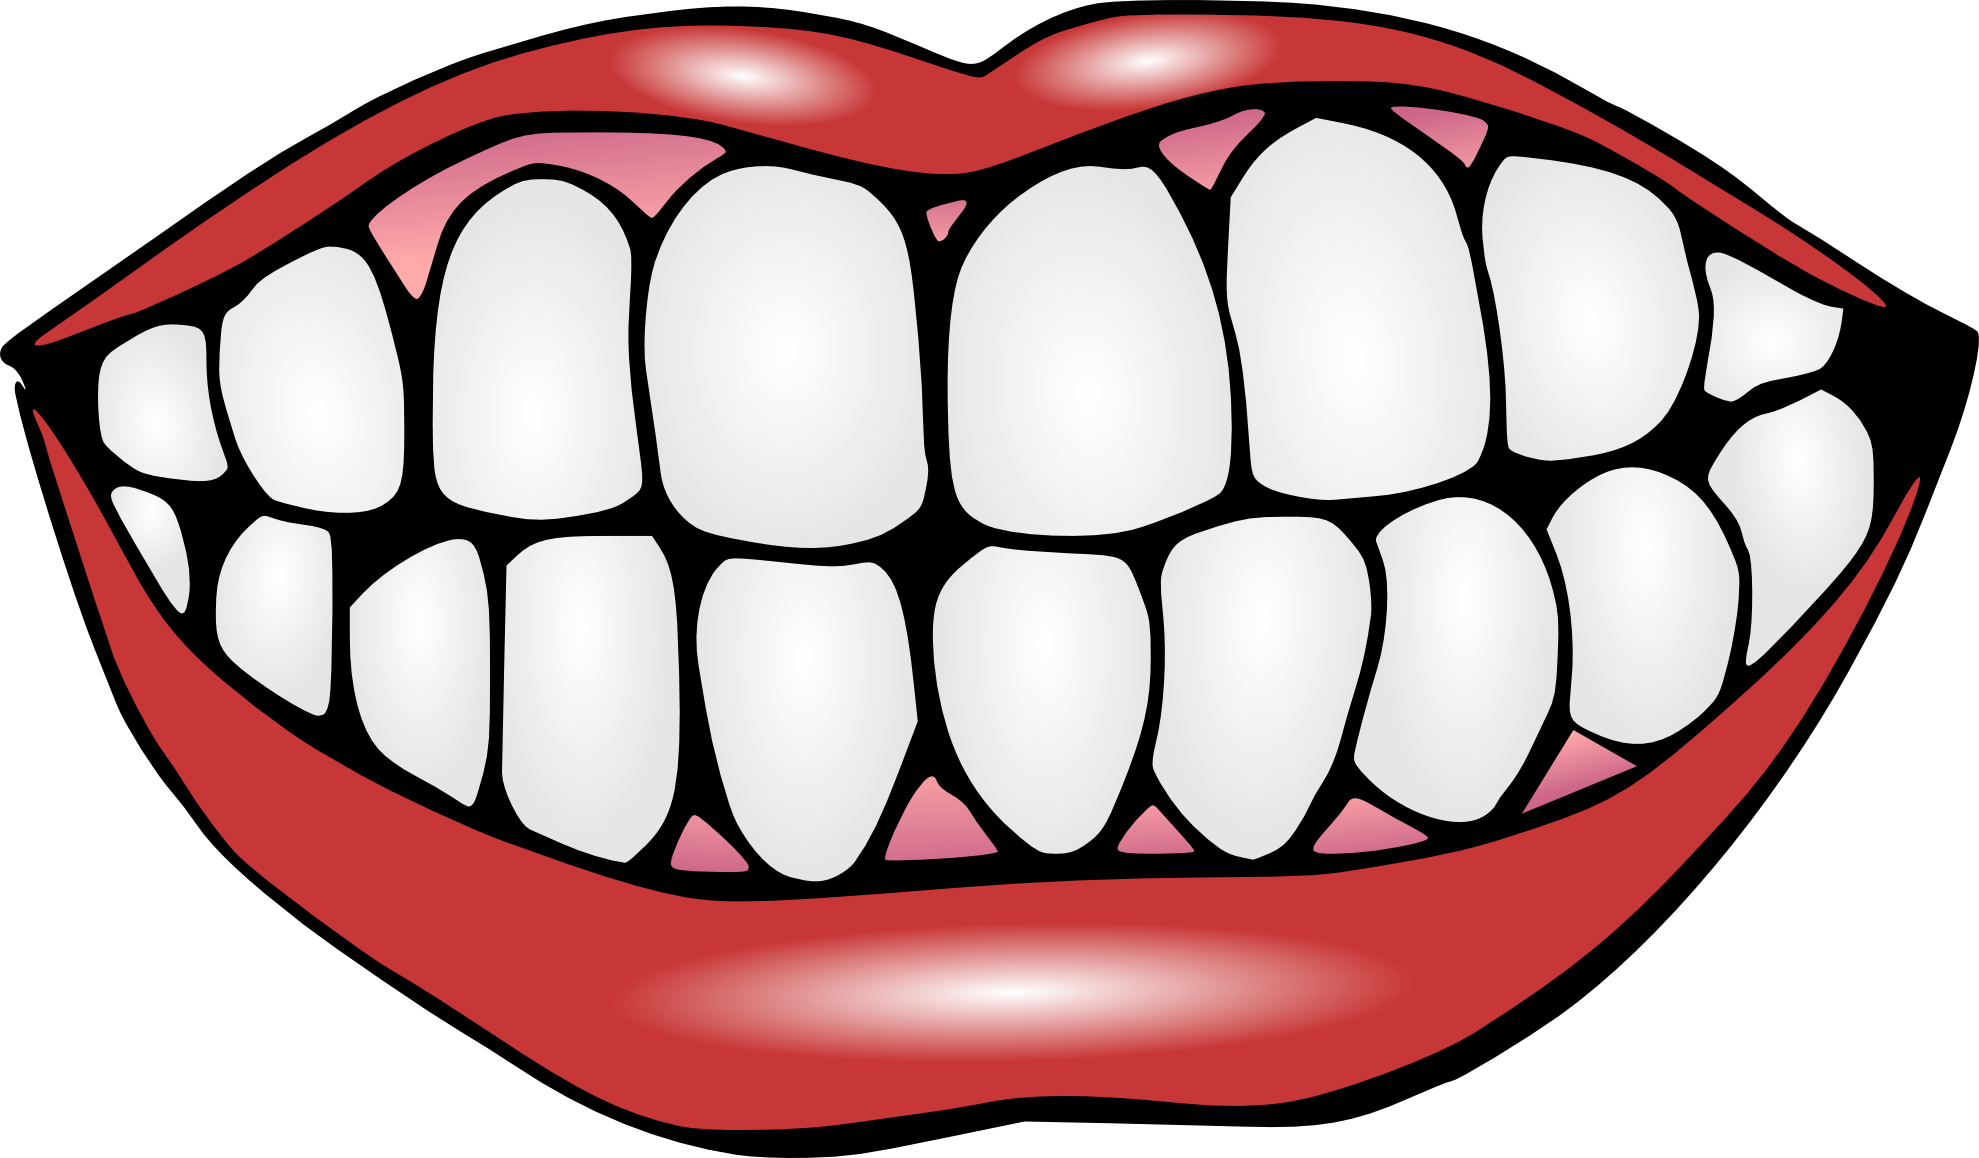 Tooth Smile PNG Image Background